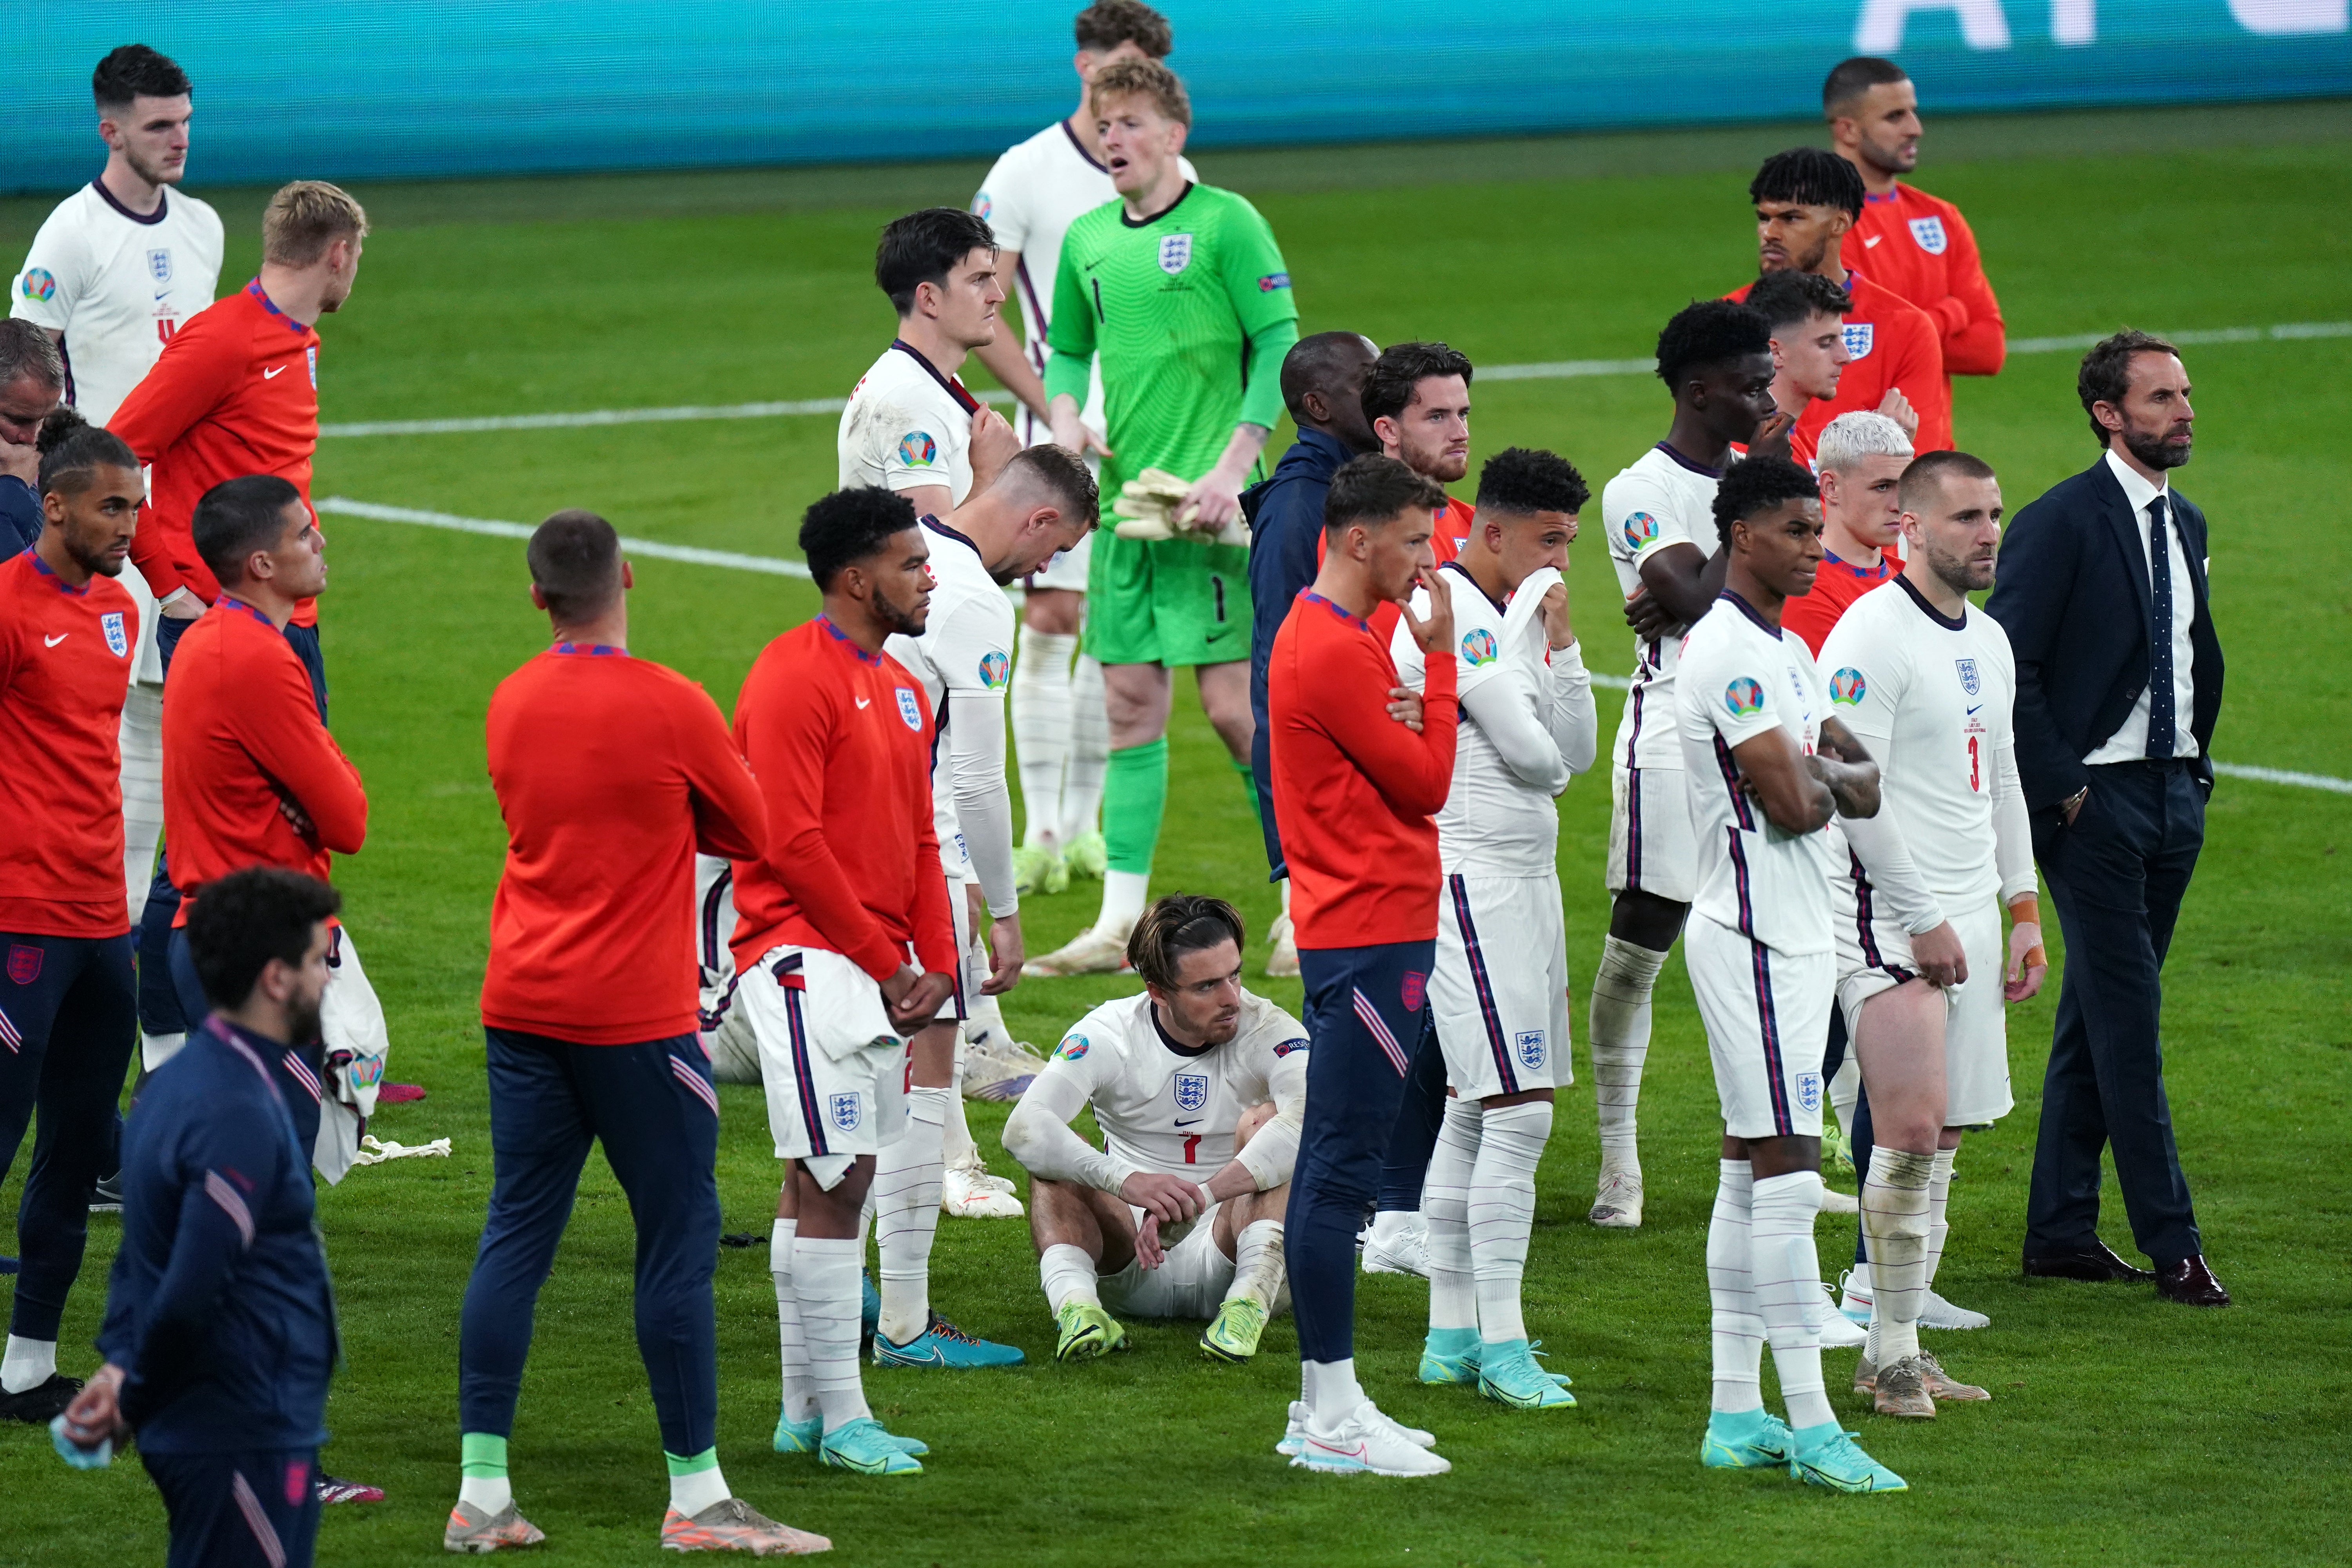 England’s players are crest-fallen after losing to Italy on penalties in the Euro 2020 final at Wembley (Mike Egerton/PA)